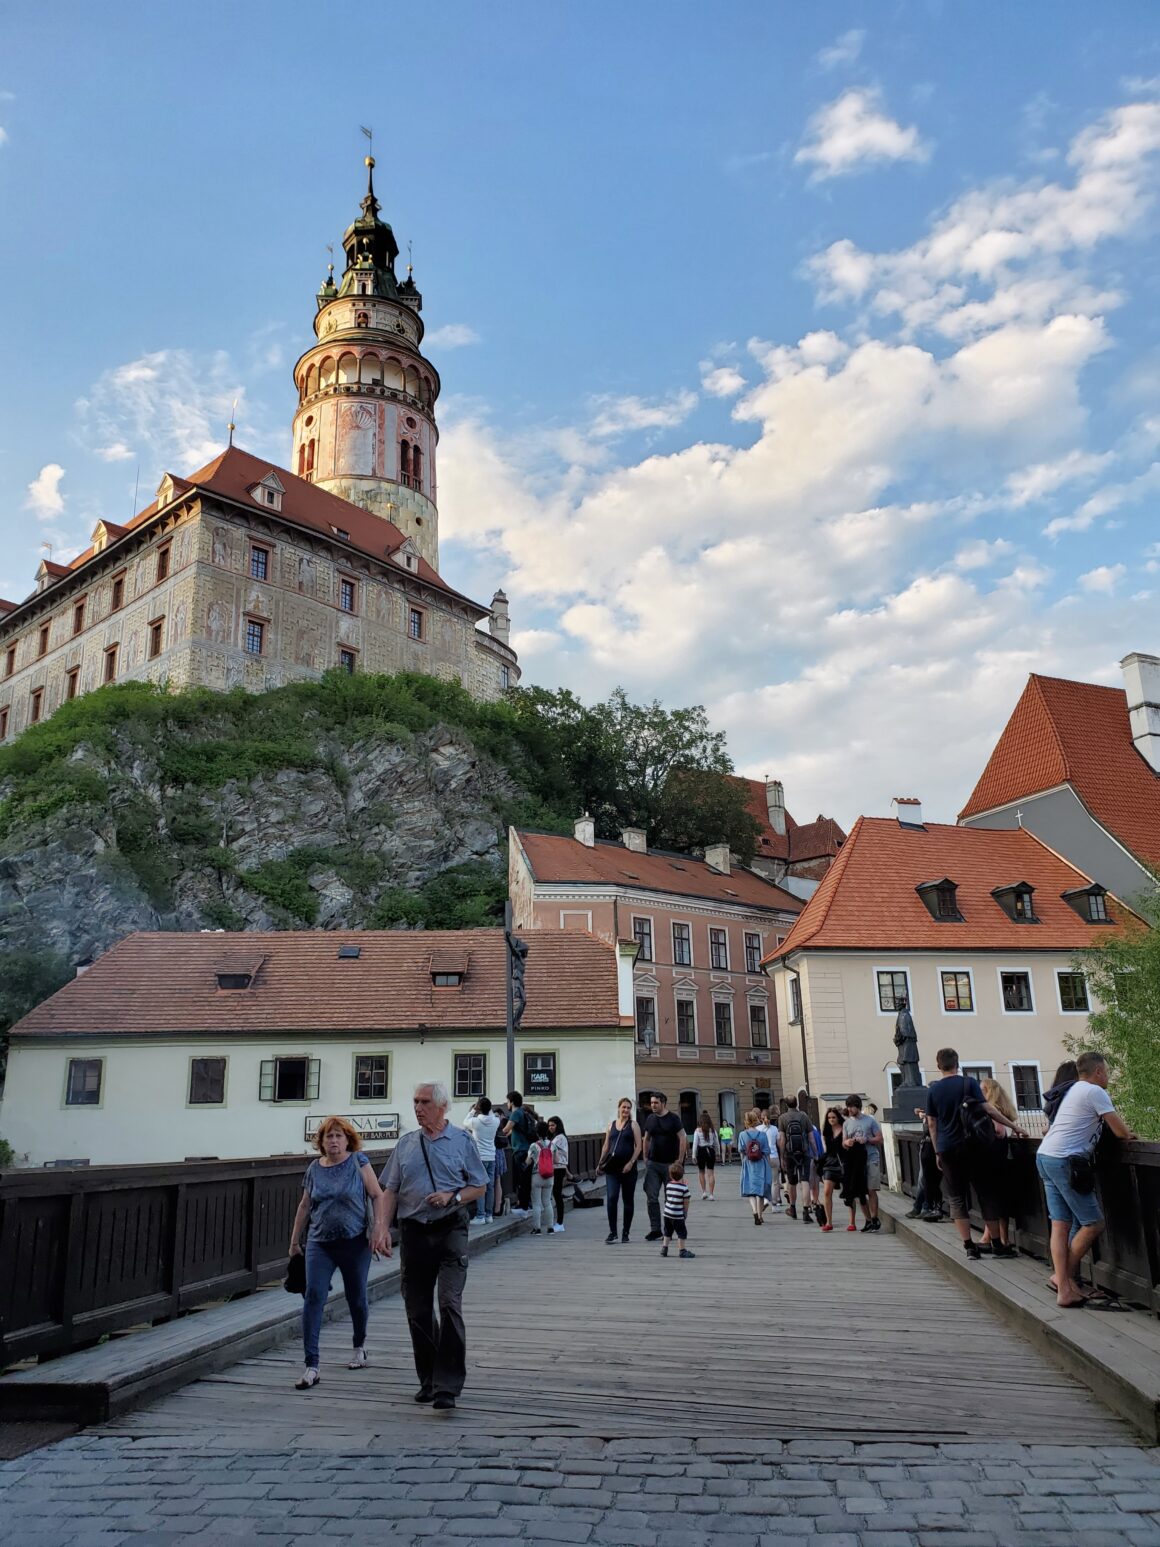 State Castle Cesky Krumlov, considered one of the most beautiful castles in Czech Republic